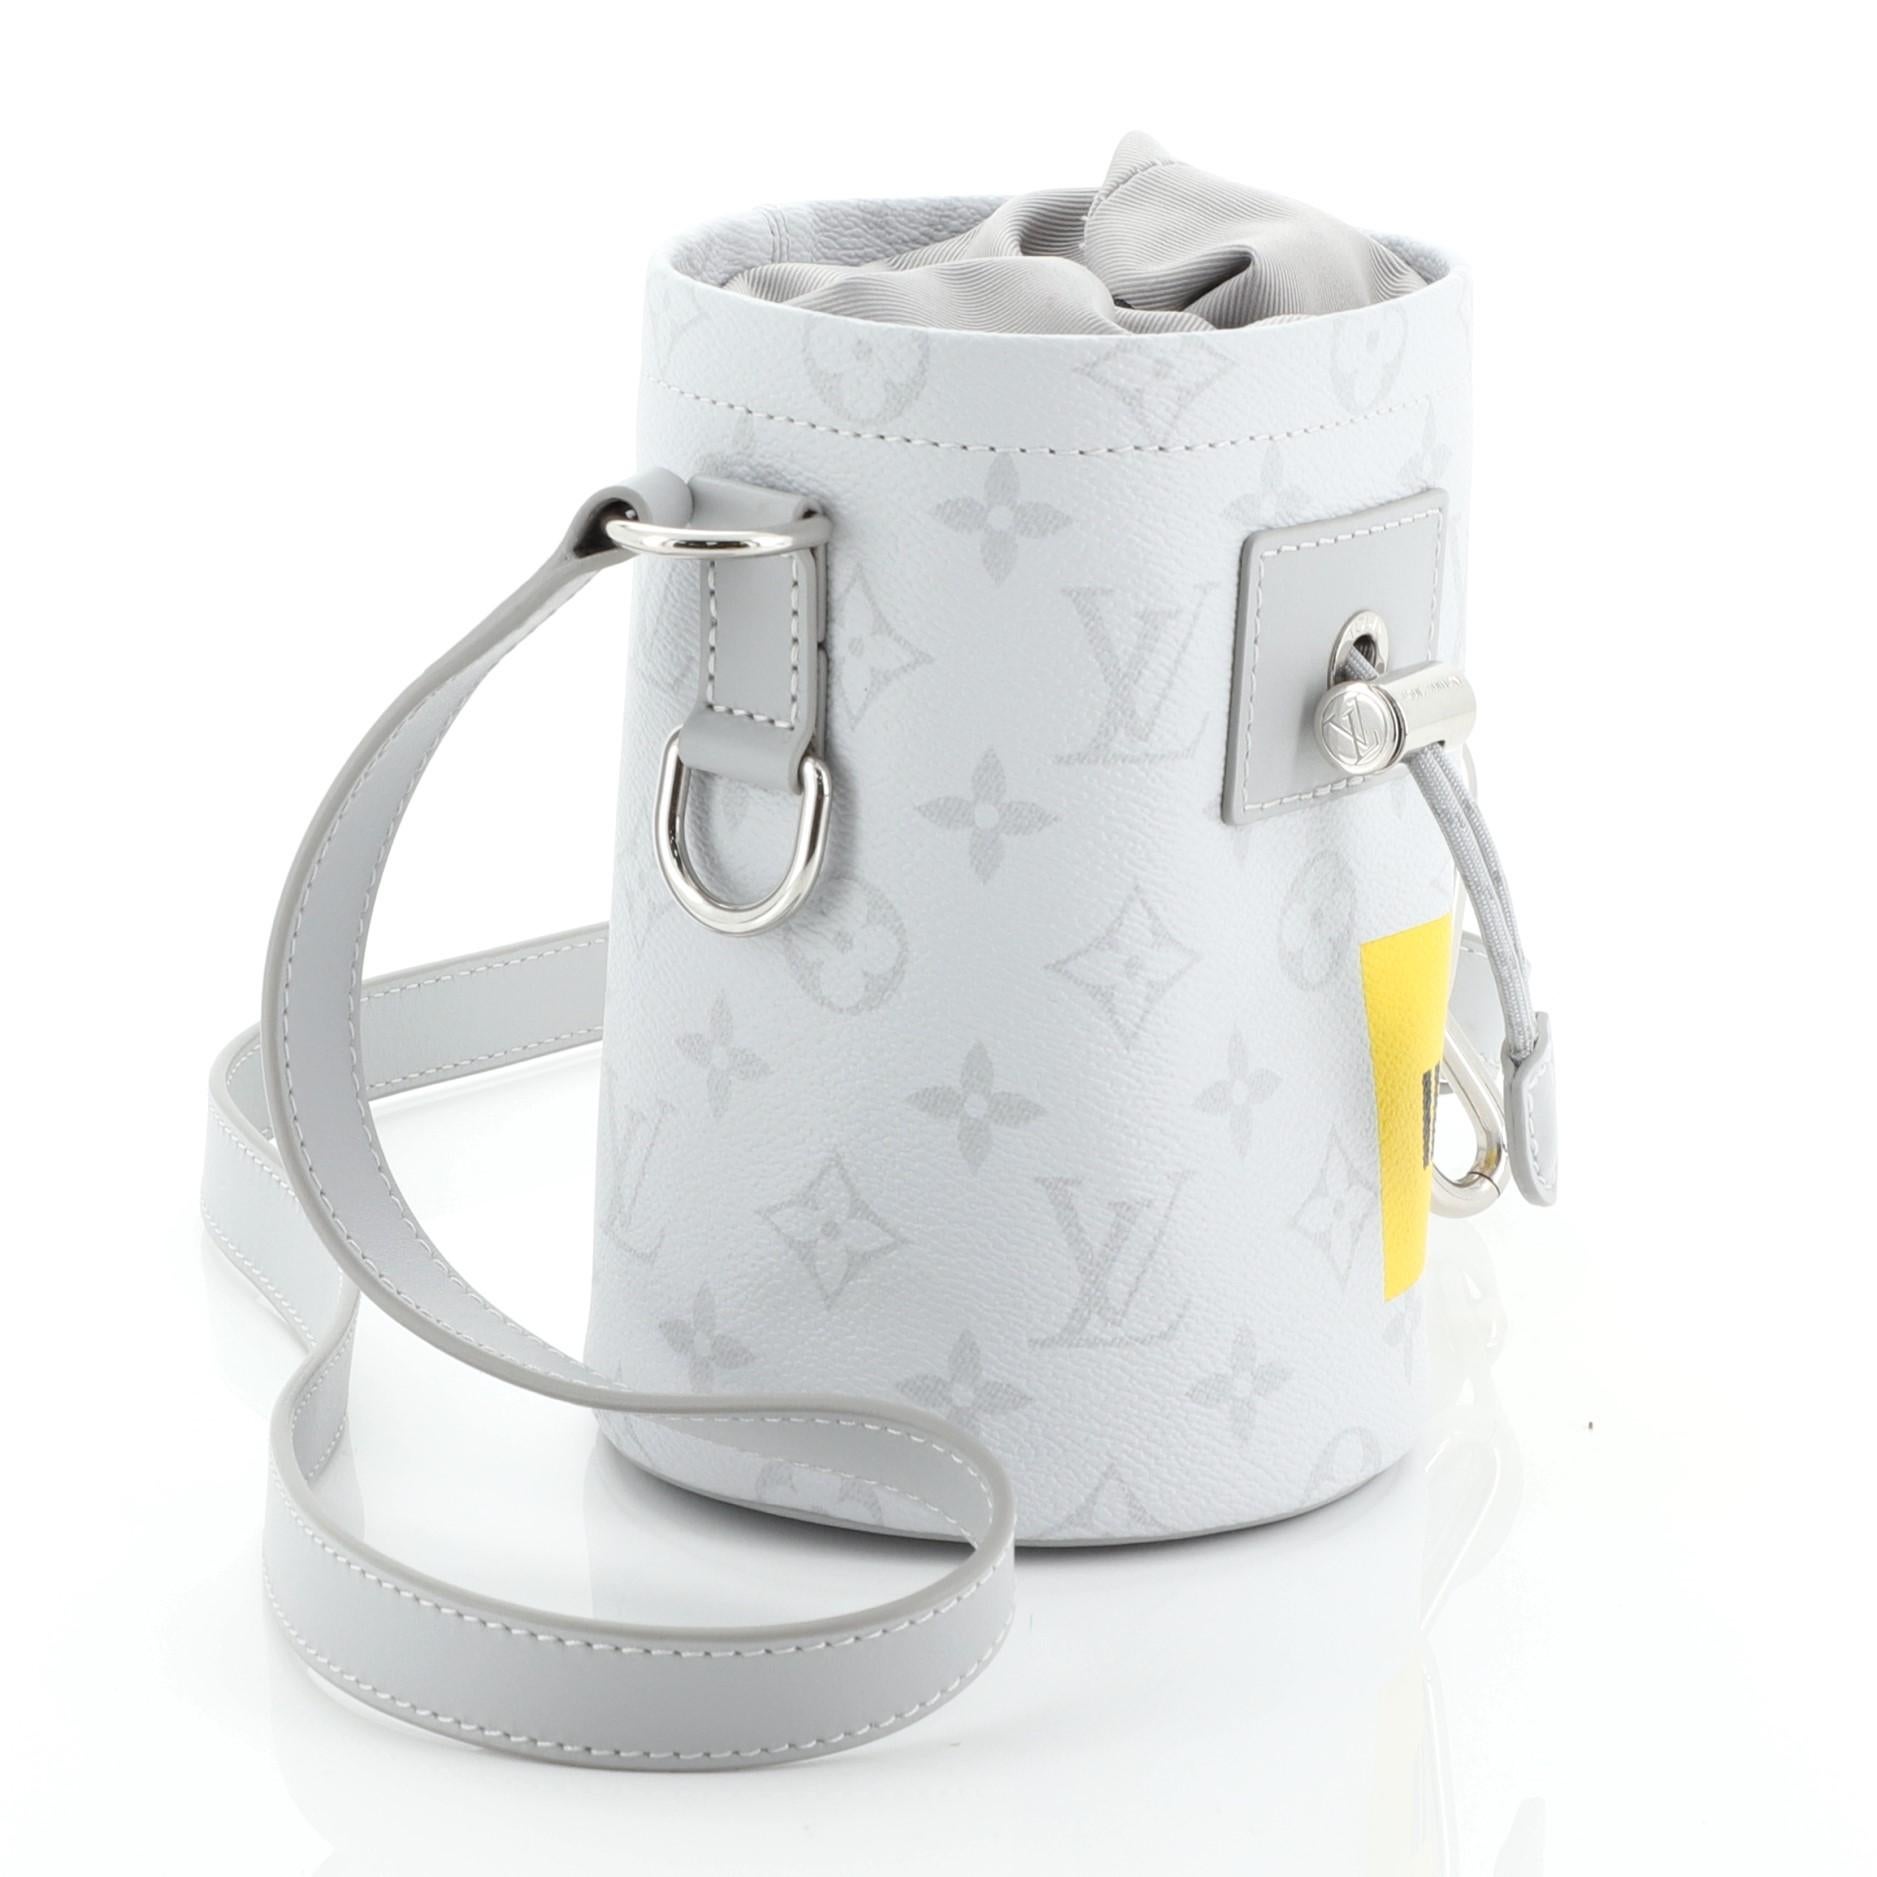 This Louis Vuitton Chalk Nano Bag Limited Edition Monogram White Canvas, crafted in gray coated canvas, features a leather shoulder strap, a shape inspired by climbers' chalk bags, chain and functional carabiner fastening on the strap and